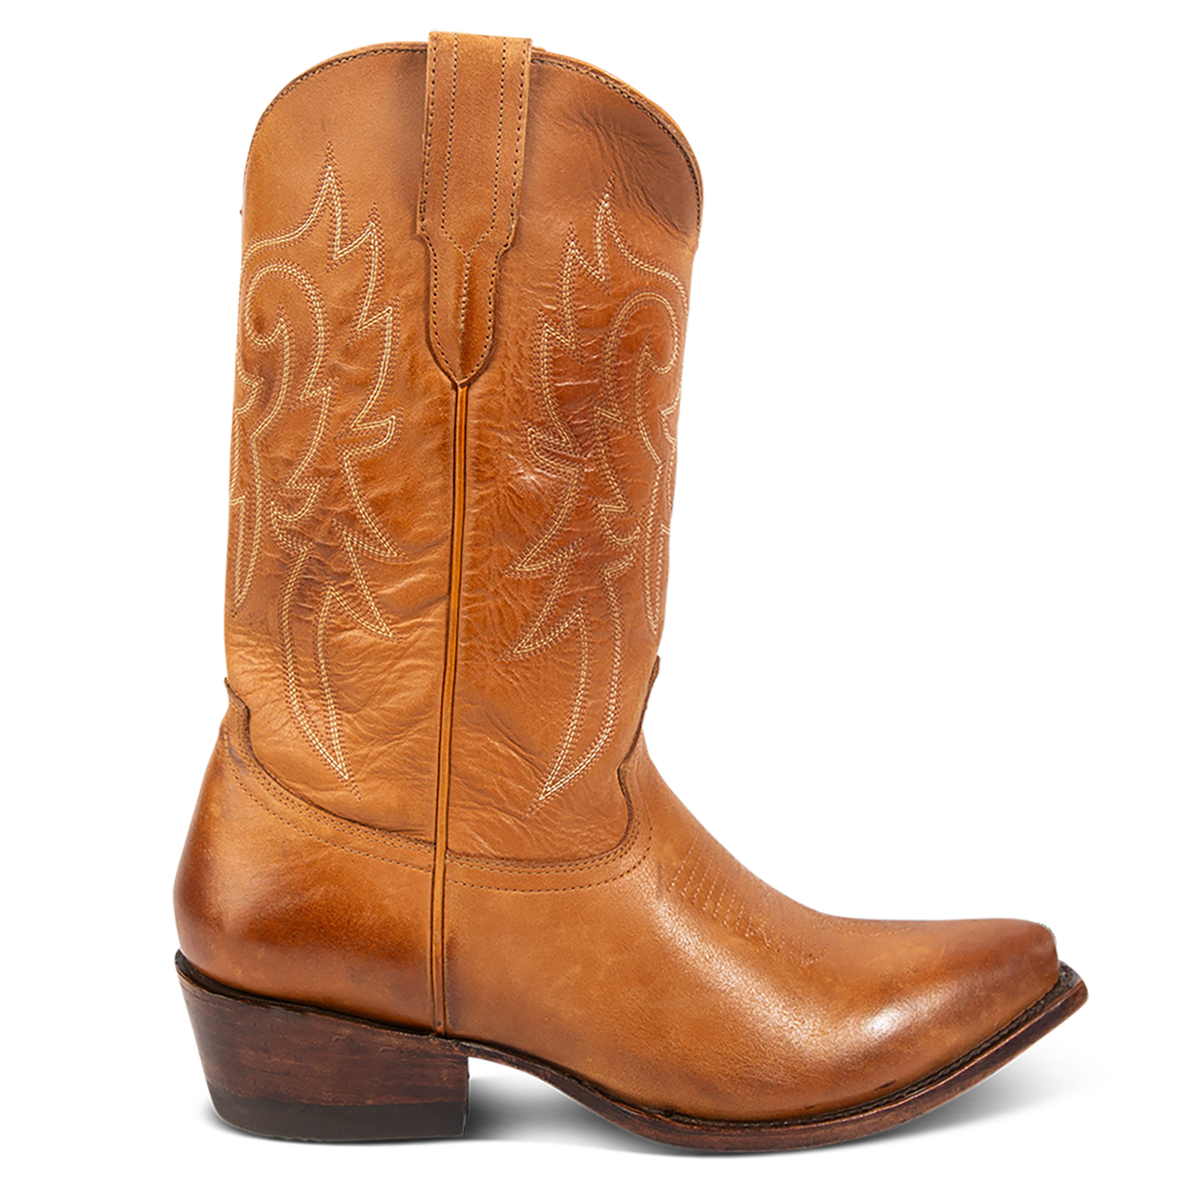 FREEBIRD men's Marshall whiskey leather western cowboy boot with shaft stitch detailing, snip toe construction and leather pull straps